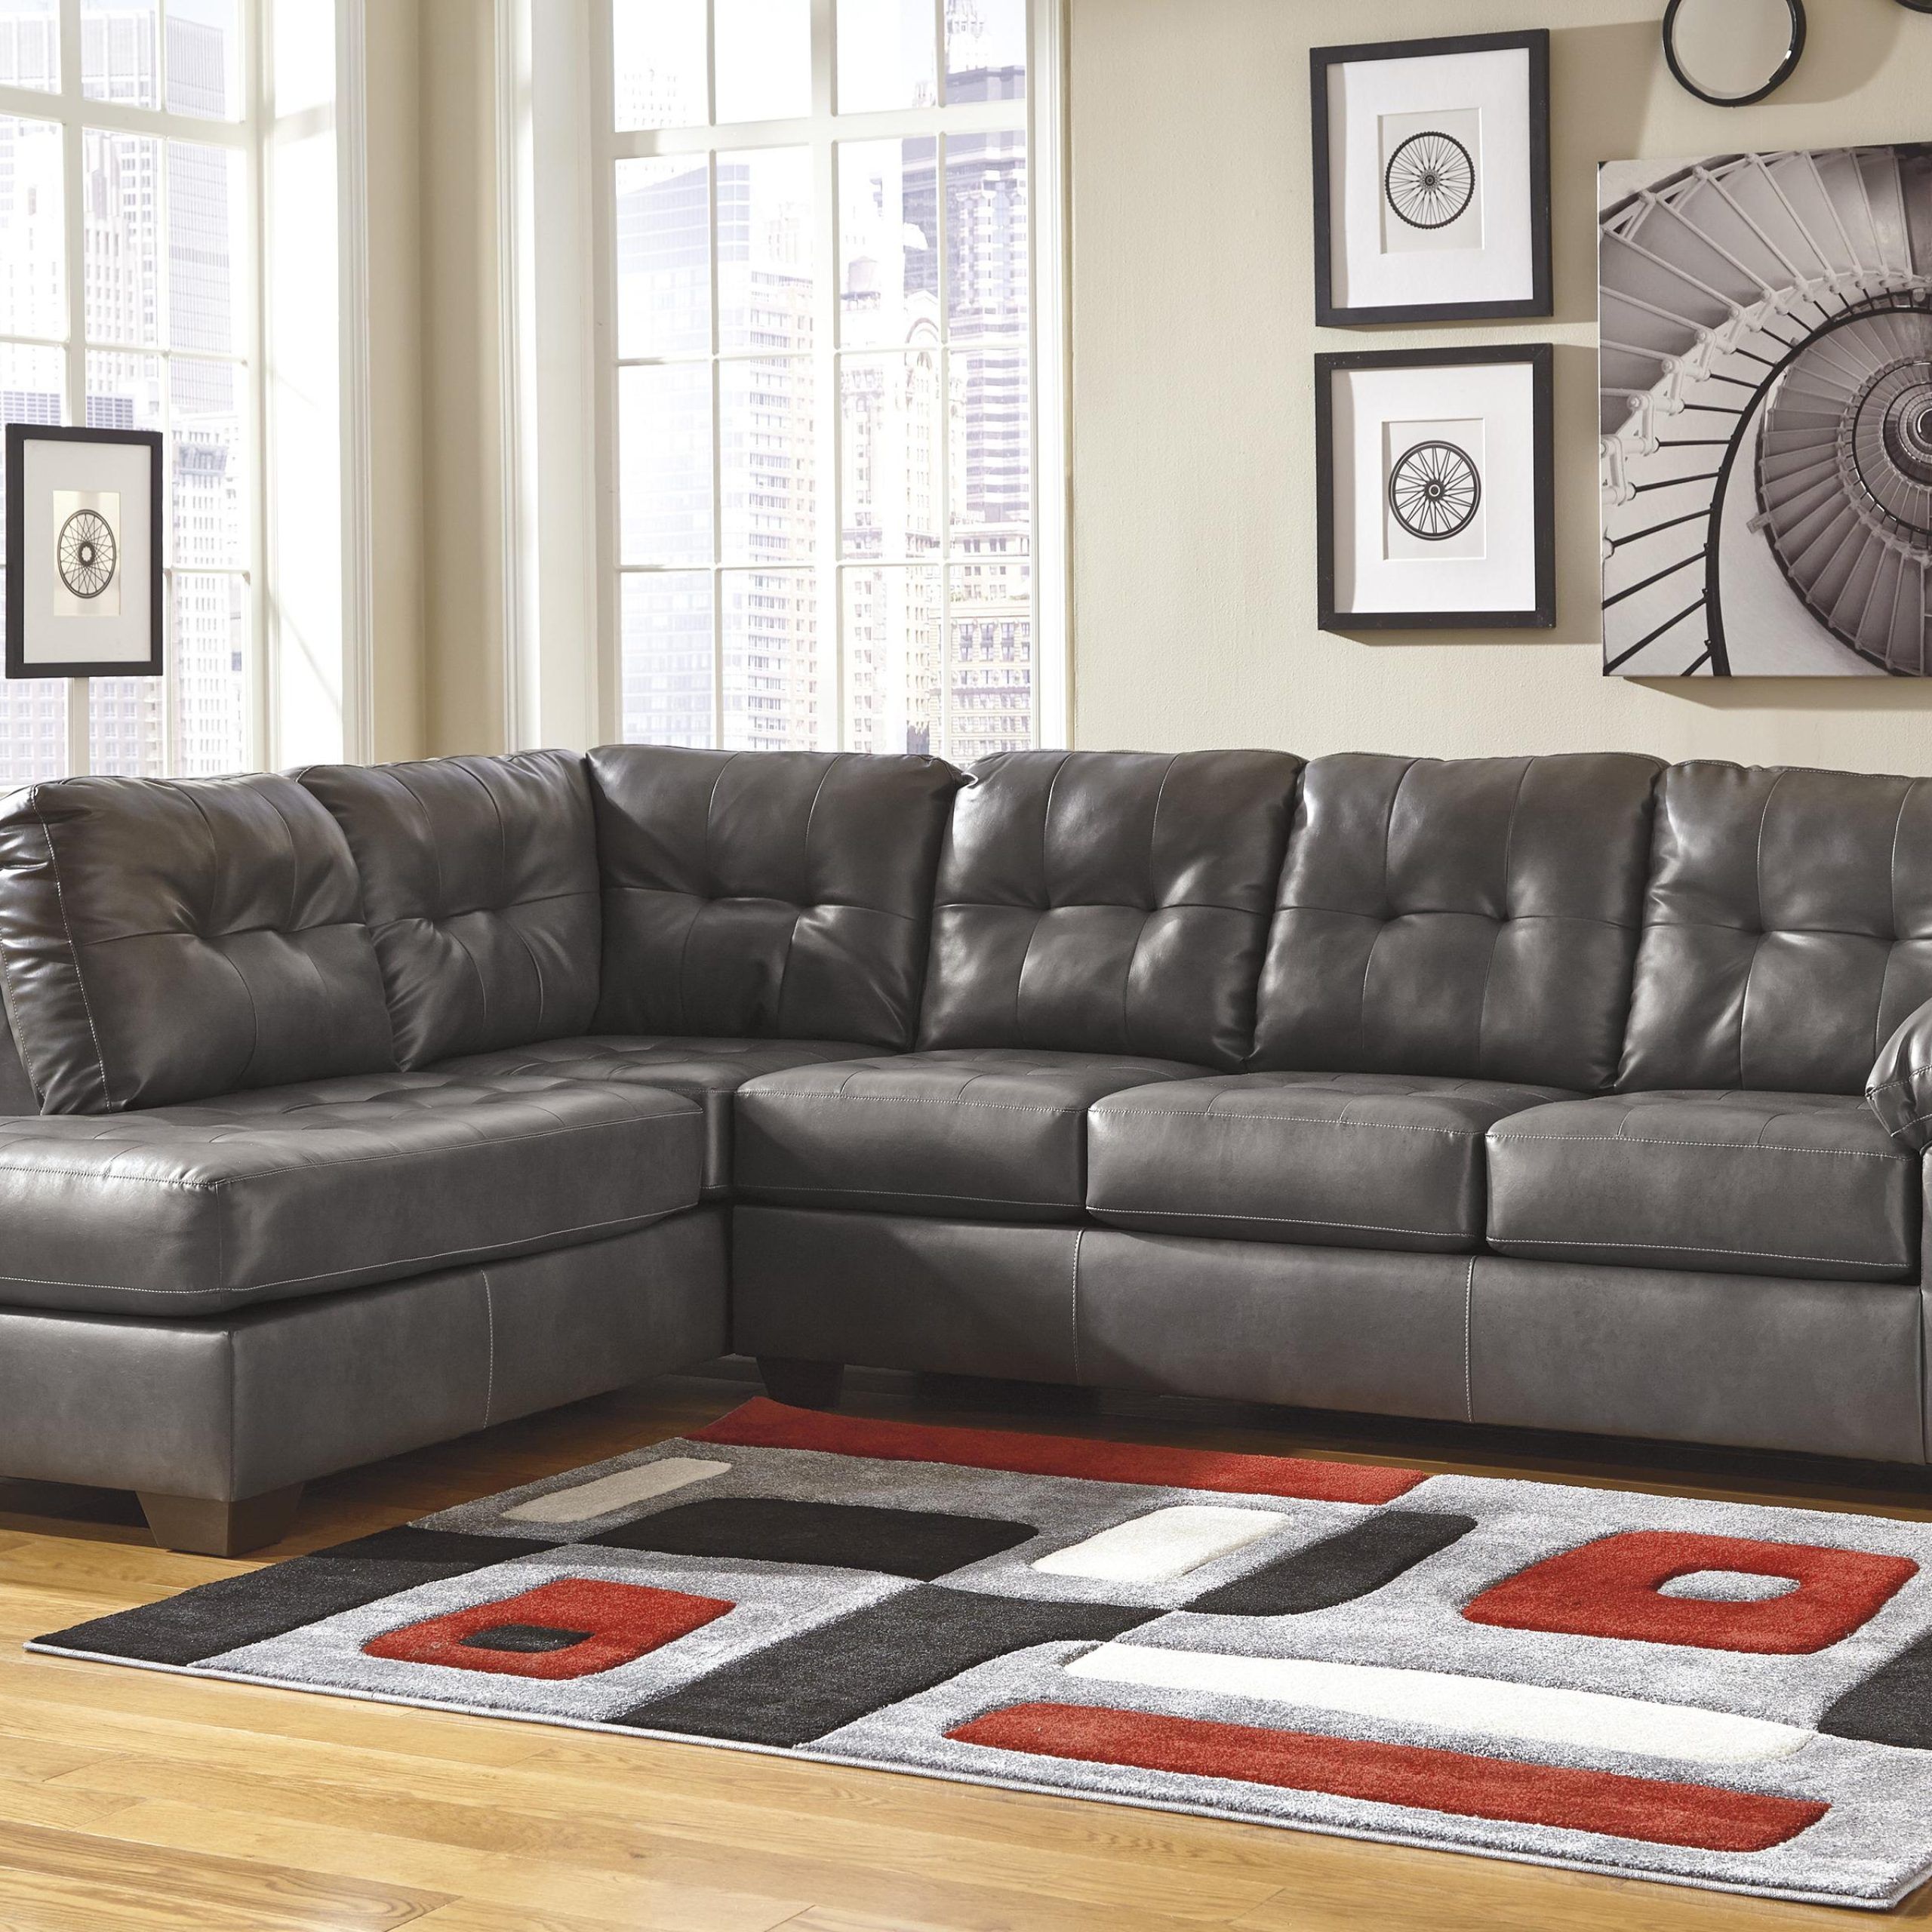 Most Current Signature Designashley Alliston Durablend Sectional W/ Right Chaise Pertaining To Right Facing Black Sofas (View 13 of 15)